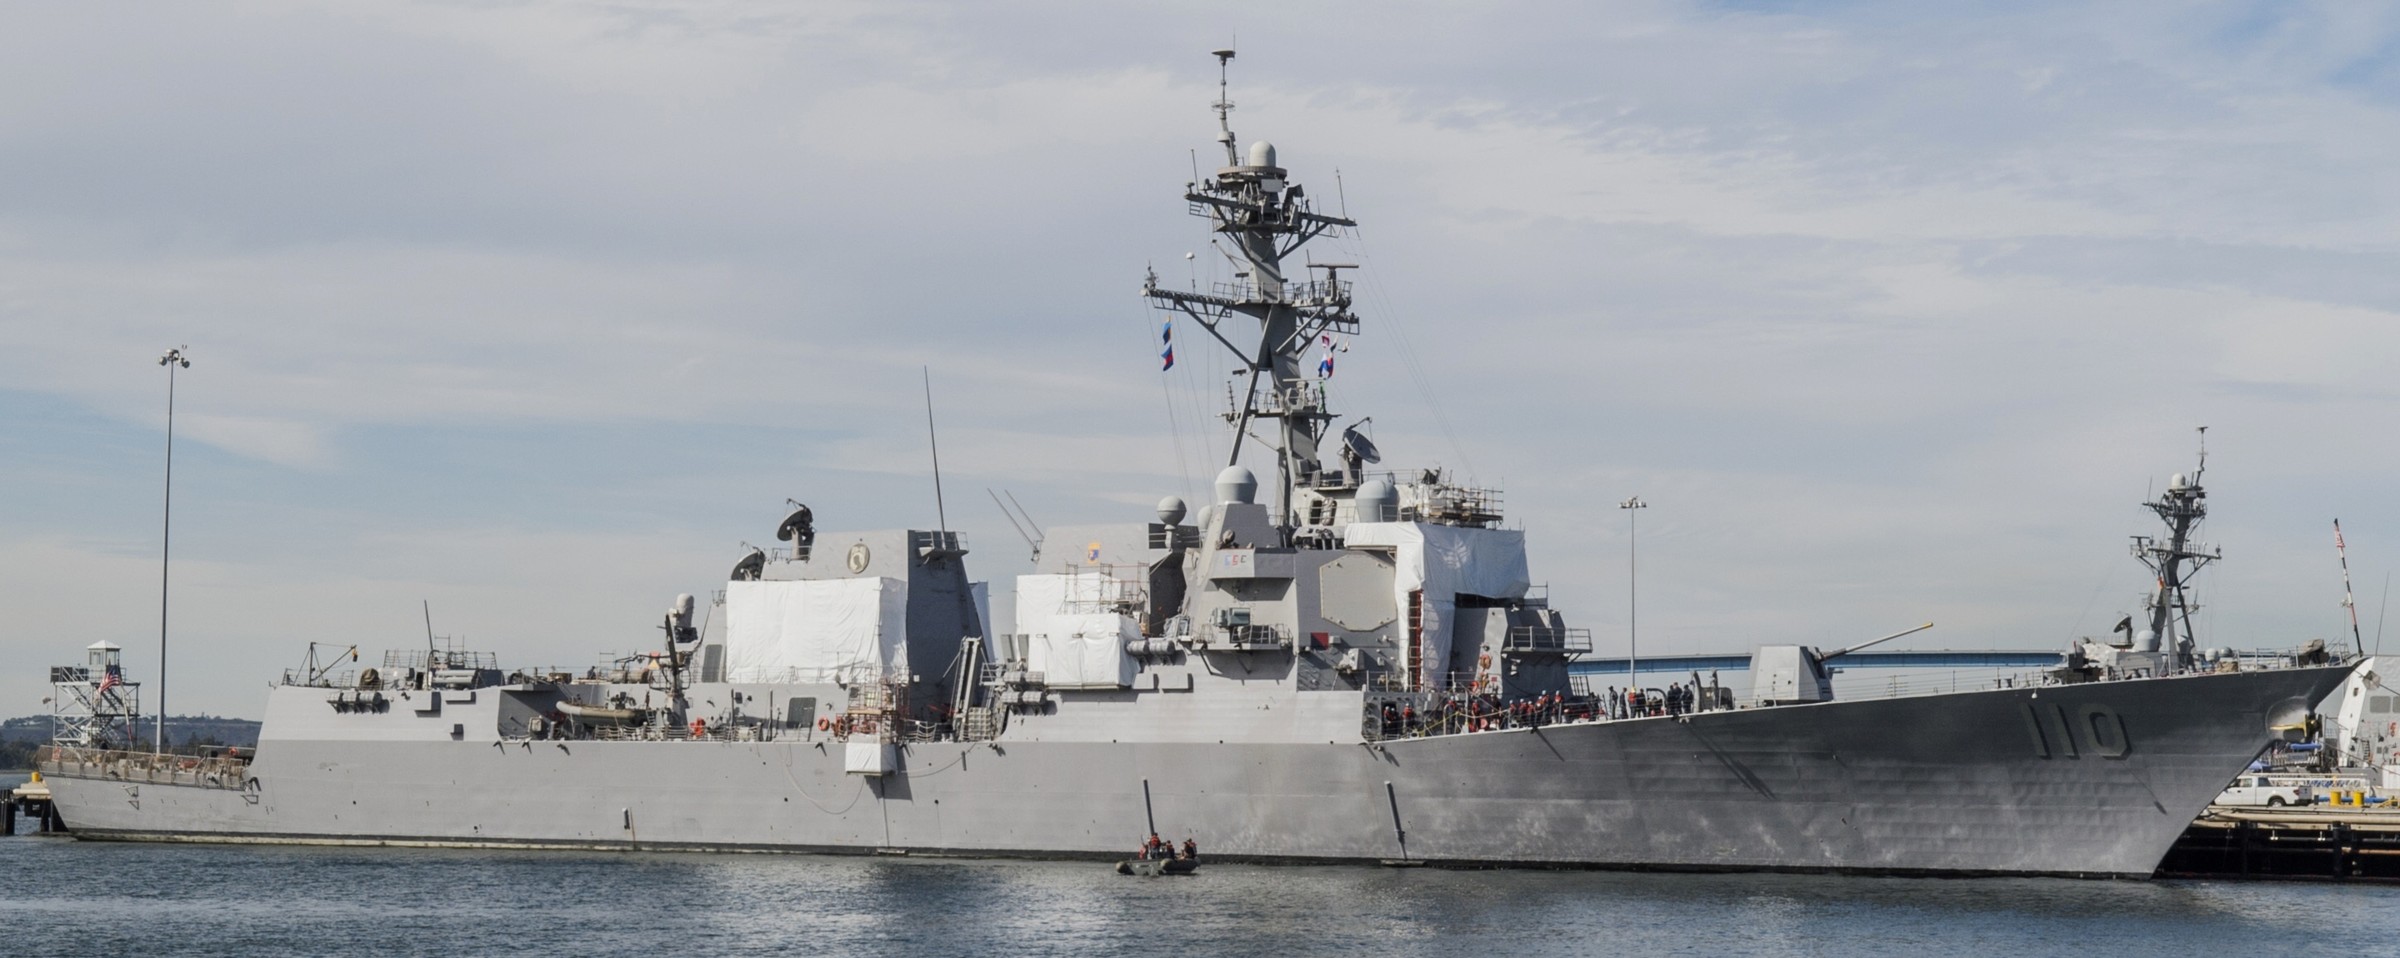 ddg-110 uss william p. lawrence arleigh burke class guided missile destroyer aegis us navy san diego california 08